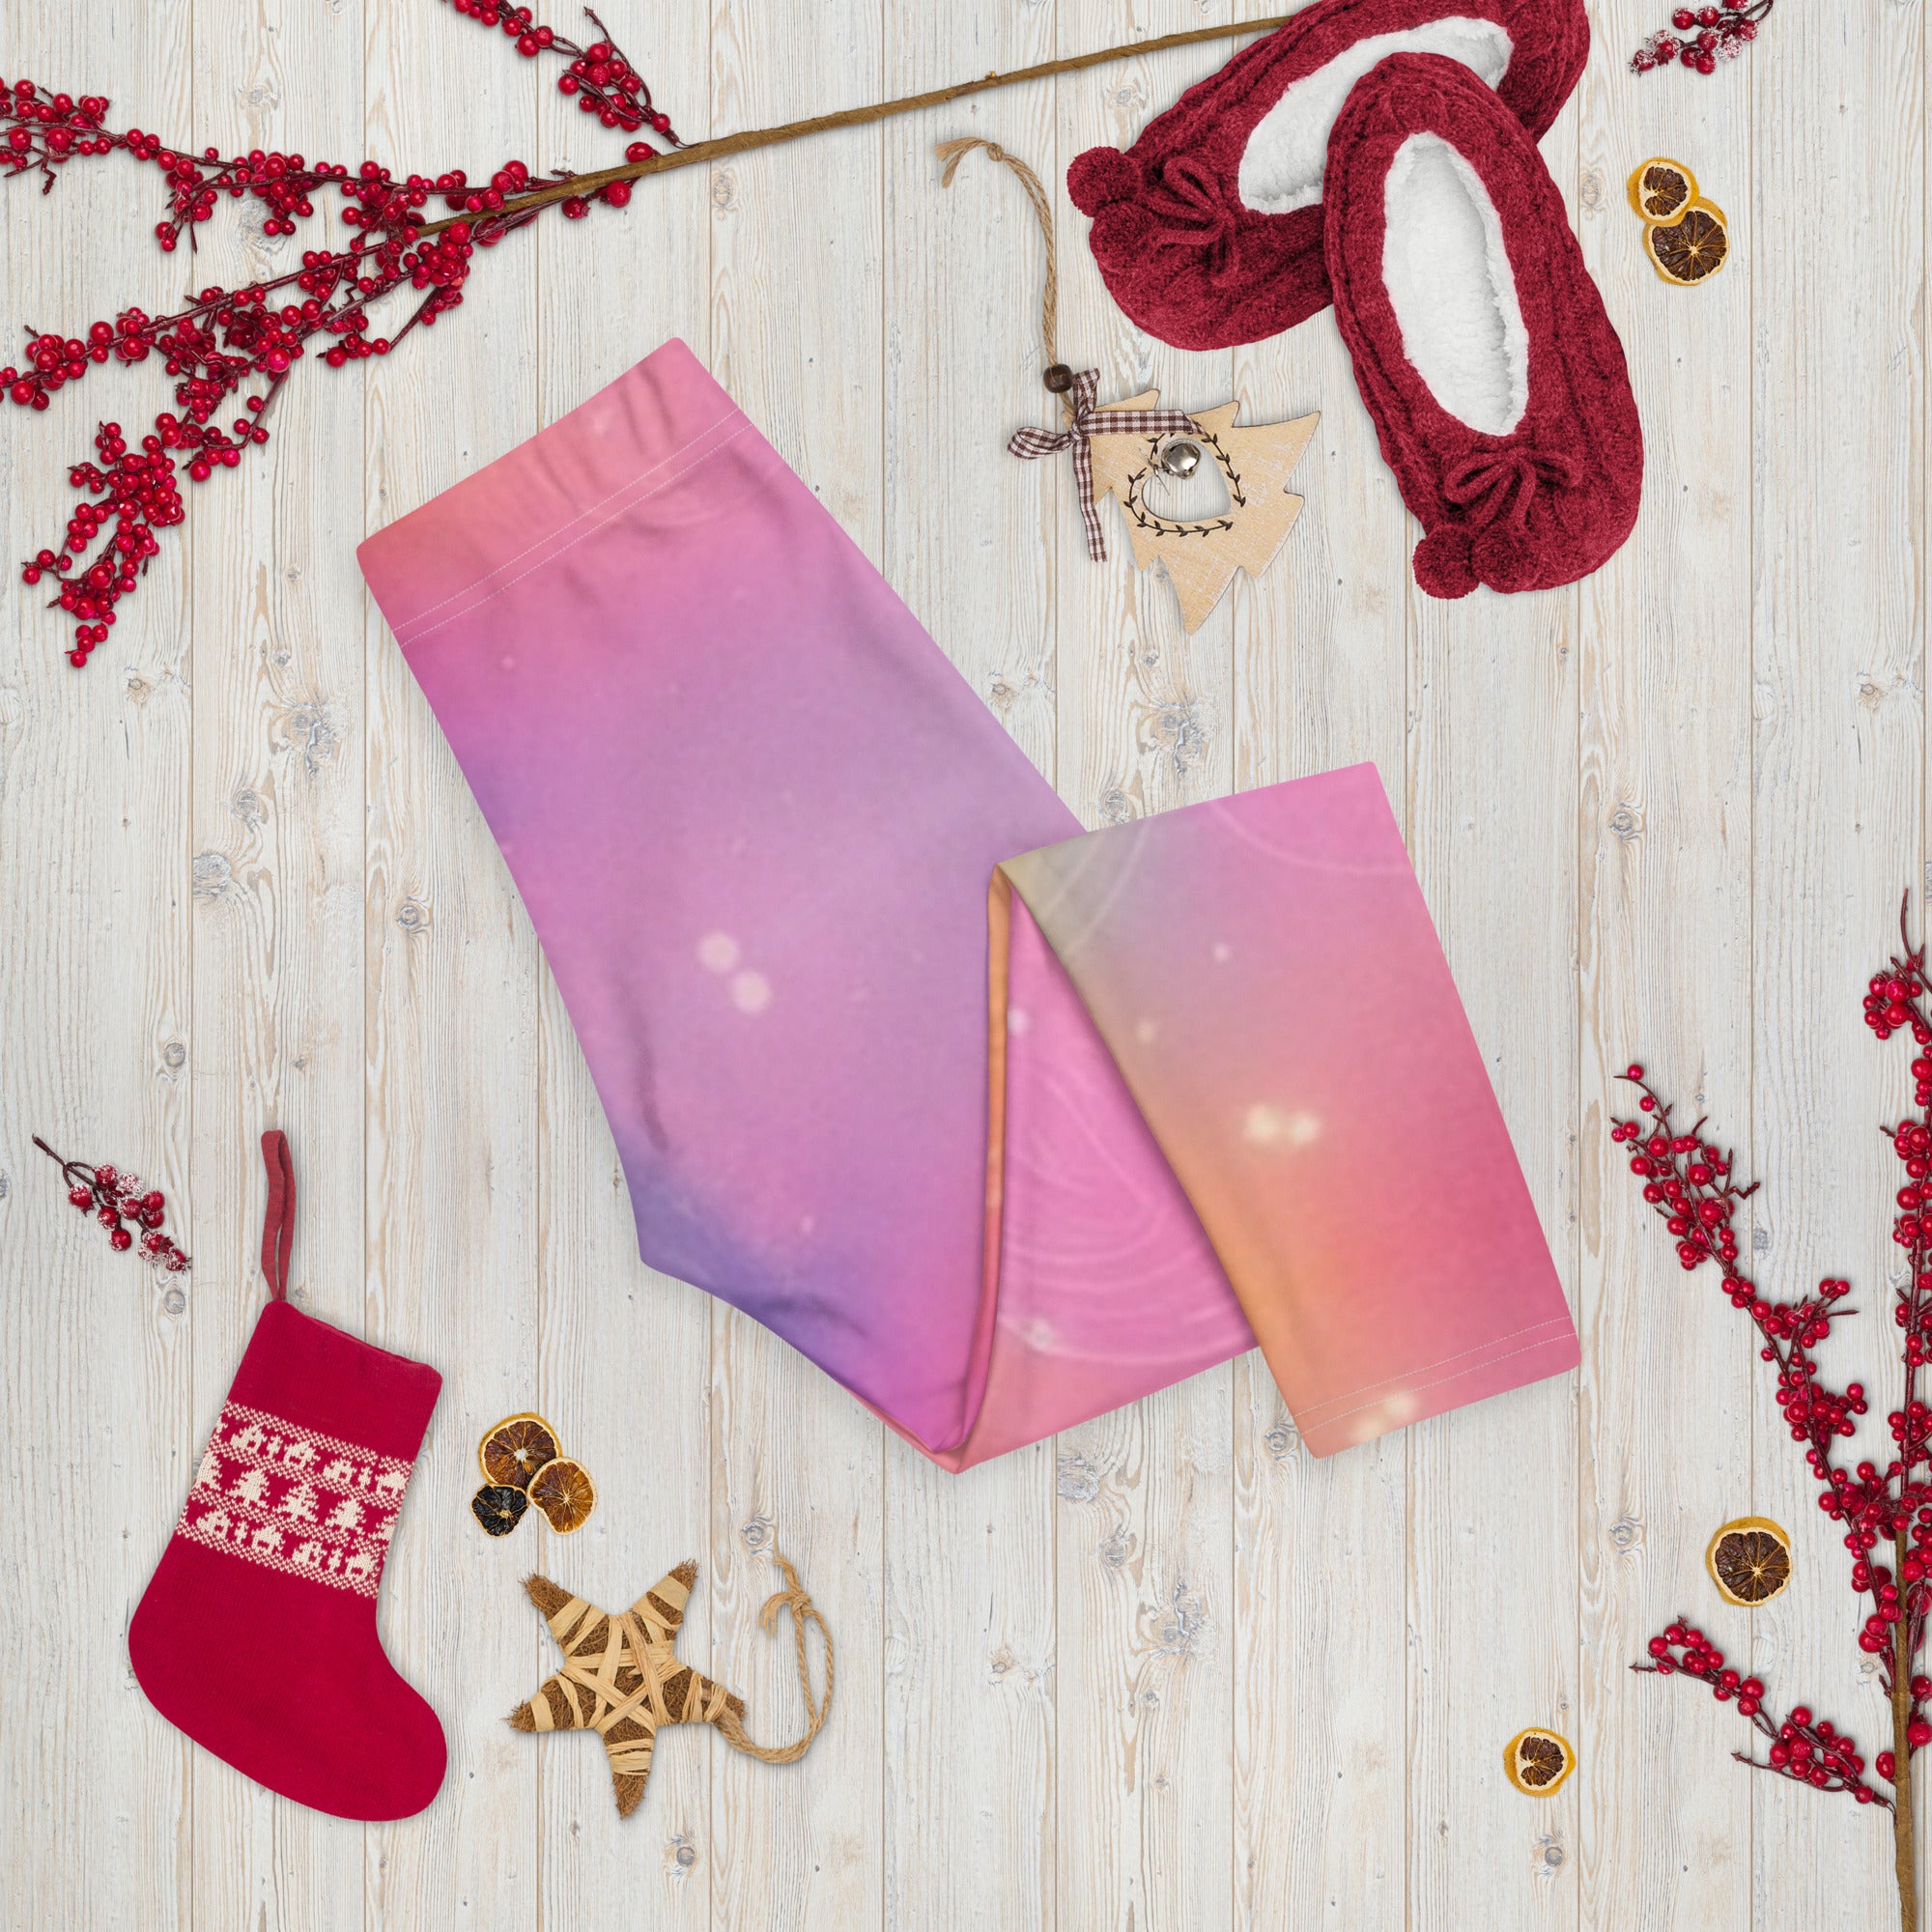 Experience Magical Comfort: Fairy Style Capri Leggings - for girls and woman!